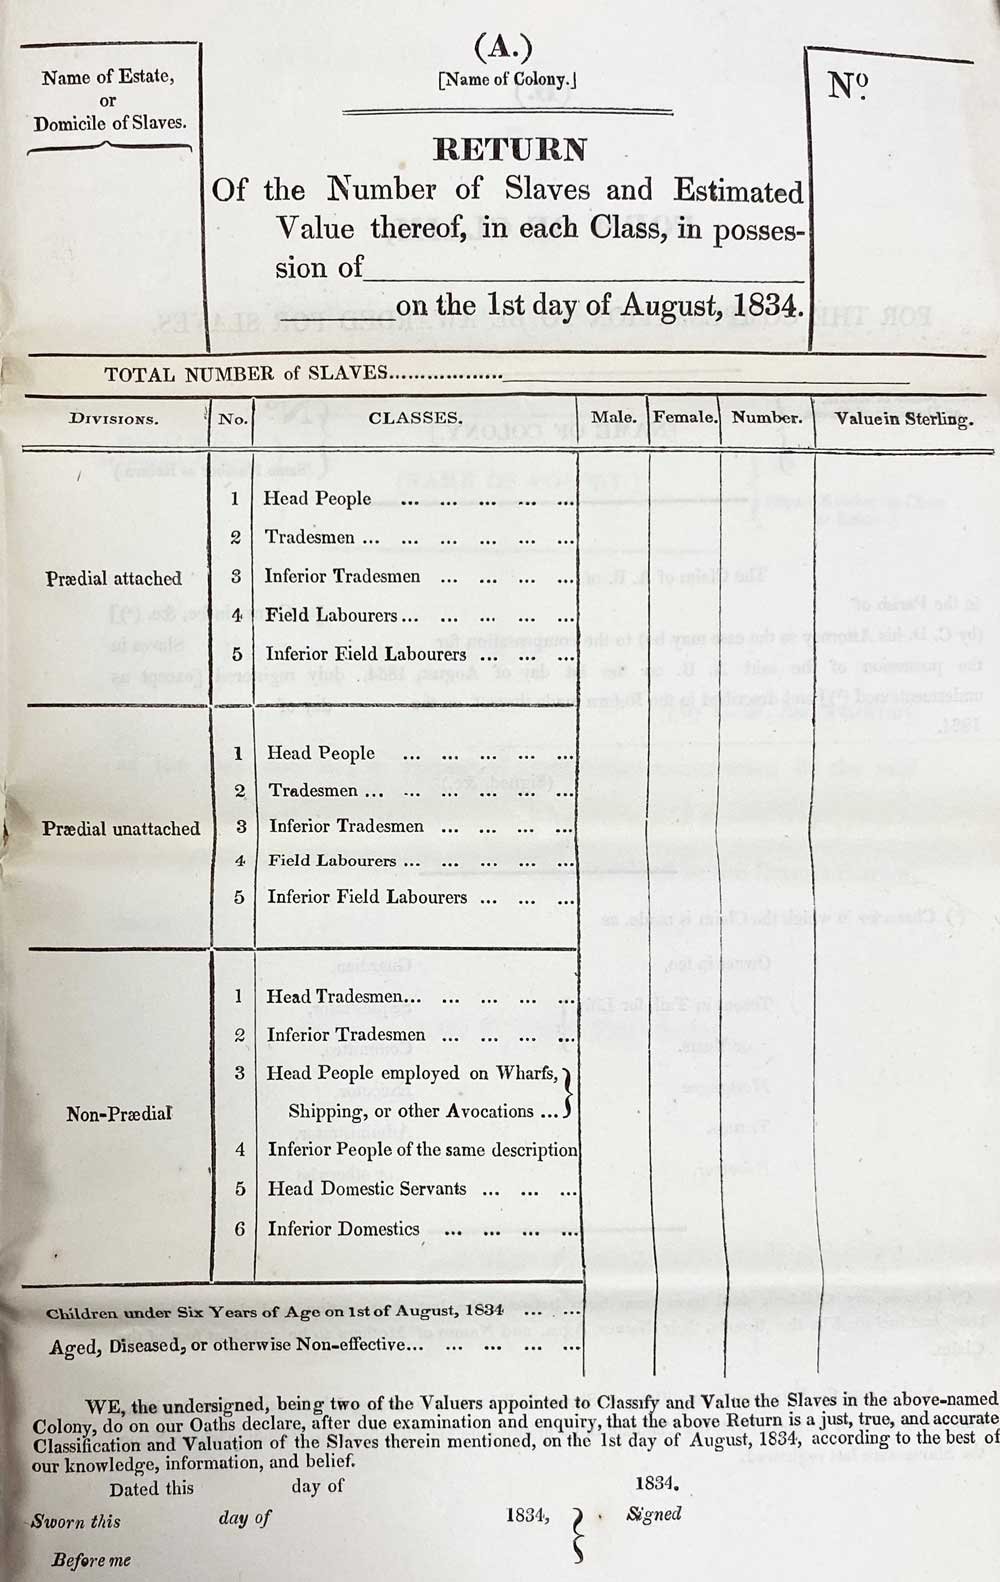 Printed form listing 'Classes' such as 'Field labourers' and space to add 'Value in Sterling'.